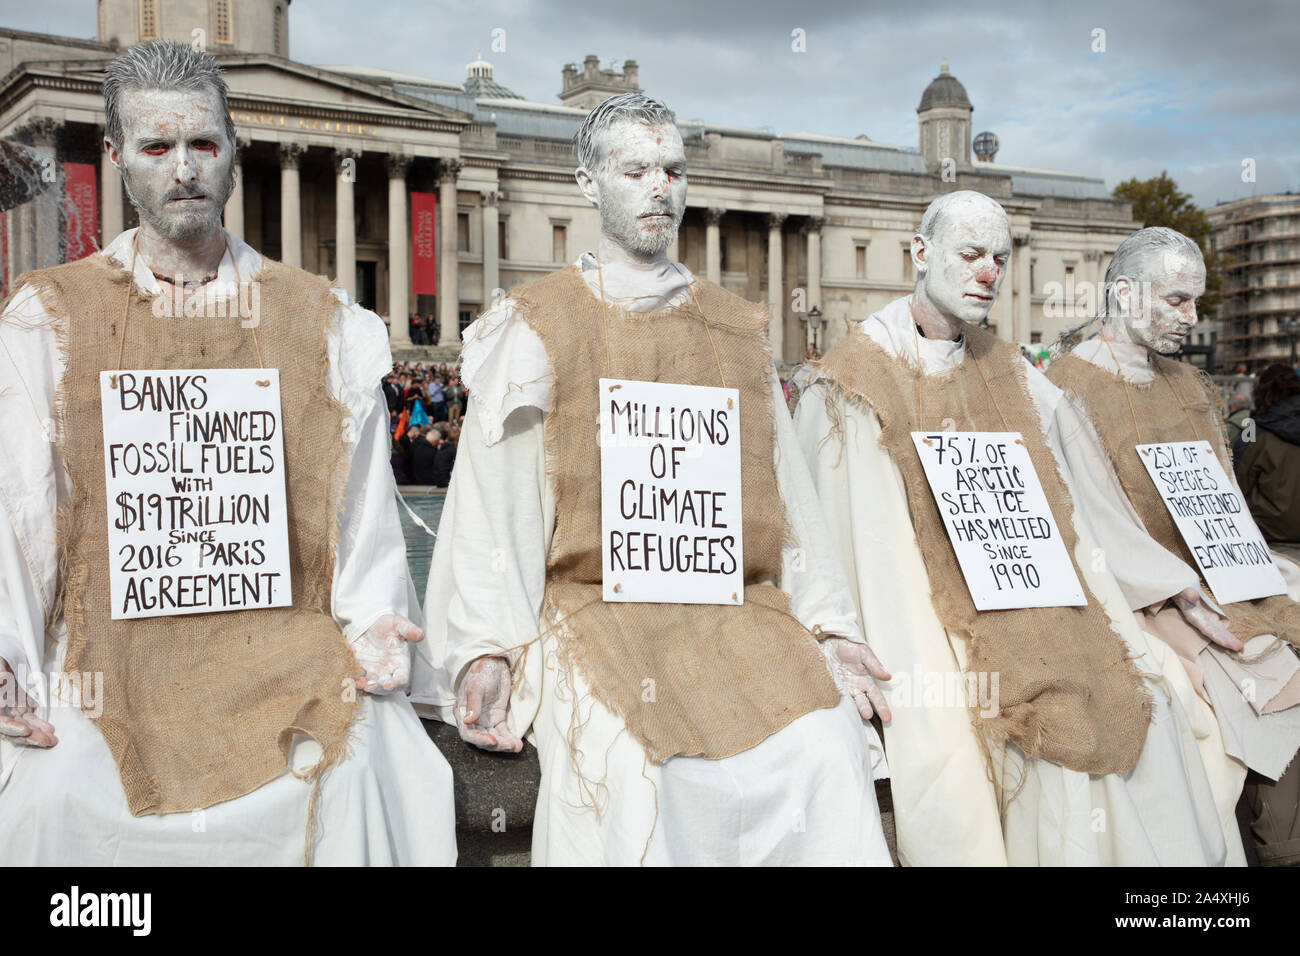 London, UK. 16th October 2019. Extinction Rebellion protesters seen on Trafalgar Square in defiance of the Section 14 of the Public Order Act 1986, issued by the police, to cease any protests within London by the climate action group. Credit: Joe Kuis / Alamy News Stock Photo